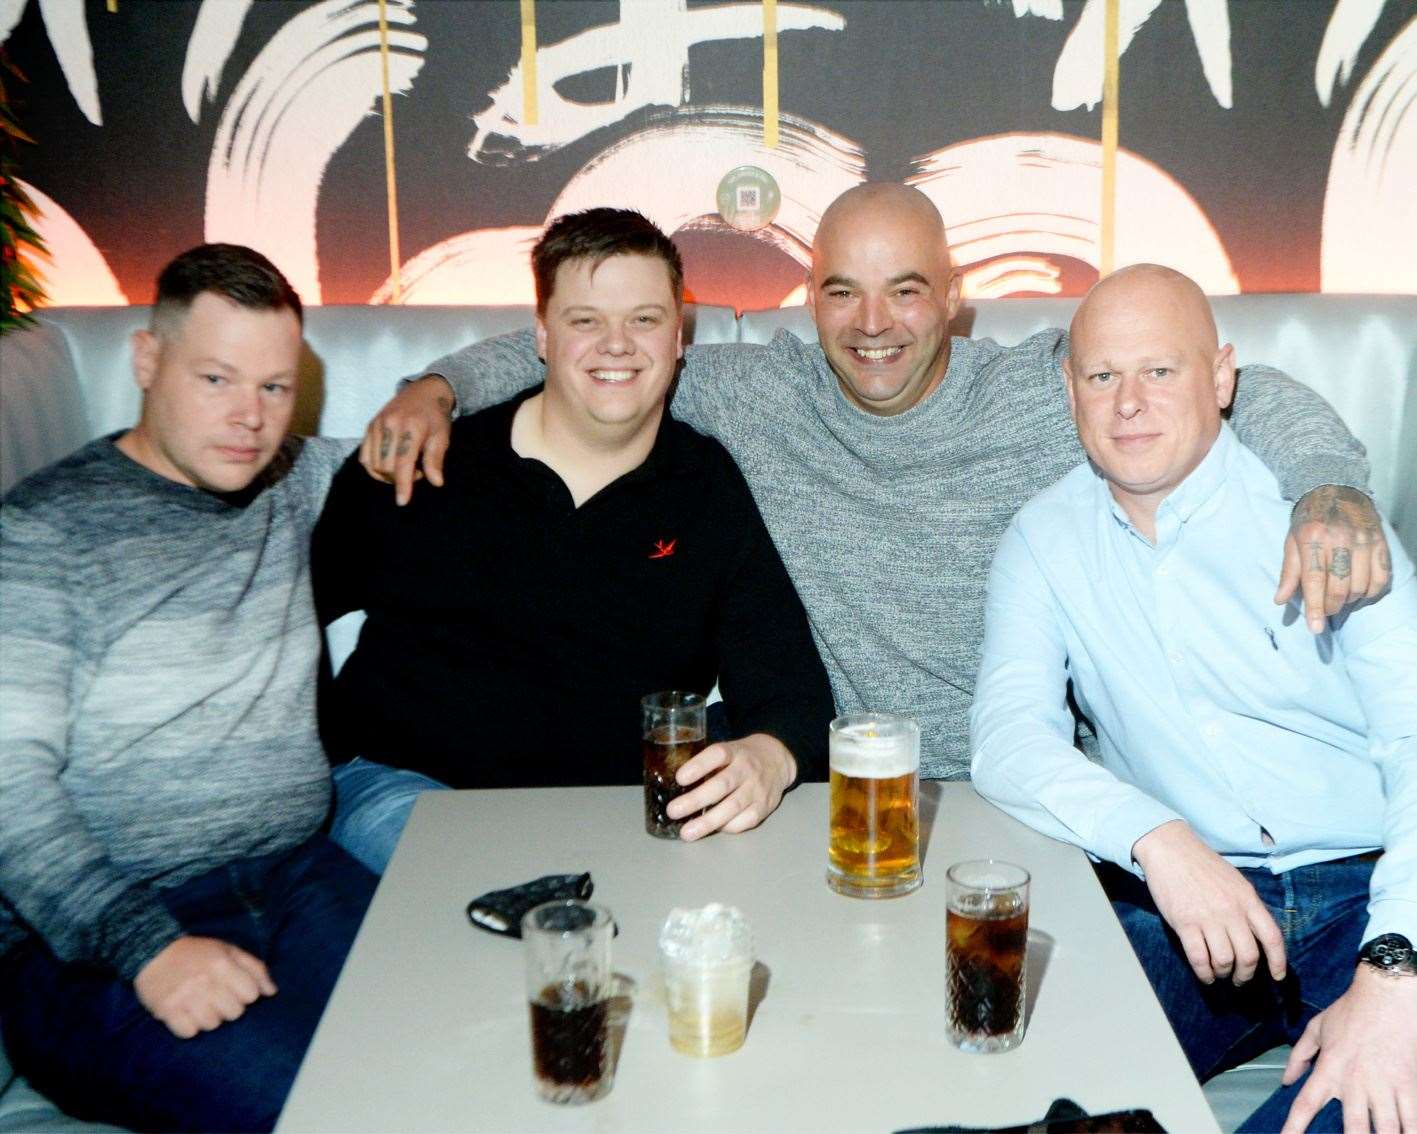 Fraser Abbot (2nd from right) celebrating his birthday with friends. Picture: James Mackenzie.